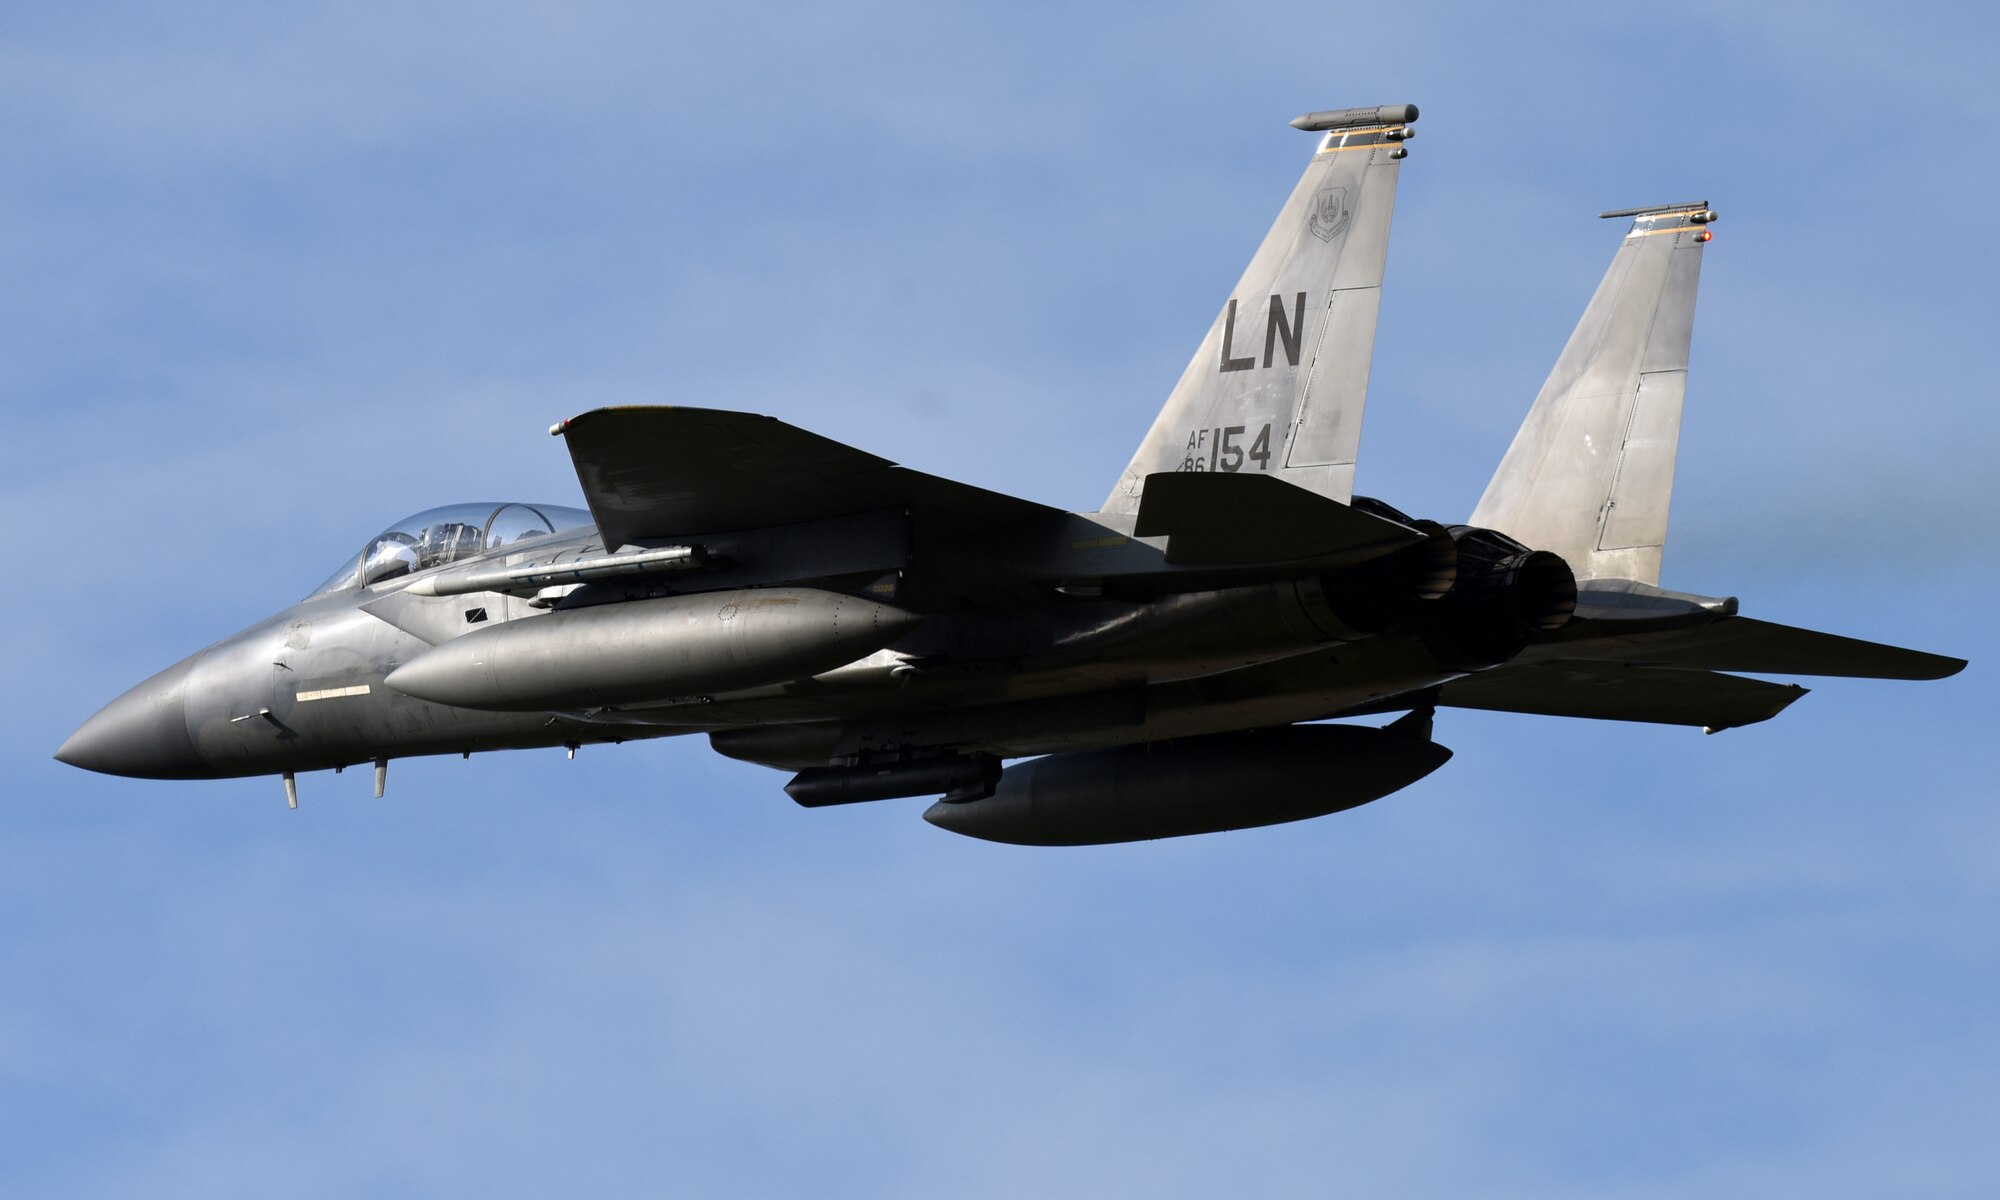 An F-15C Eagle assigned to the 493rd Fighter Squadron takes off on the flightline in support of exercise Ocean Sky at Royal Air Force Lakenheath, England, Oct. 18, 2019. Ocean Sky is an annual Spanish national fighter large force exercise that is essential to fighter combat readiness and improving interoperability among allied air forces. (U.S. Air Force photo by Airman 1st Class Madeline Herzog)